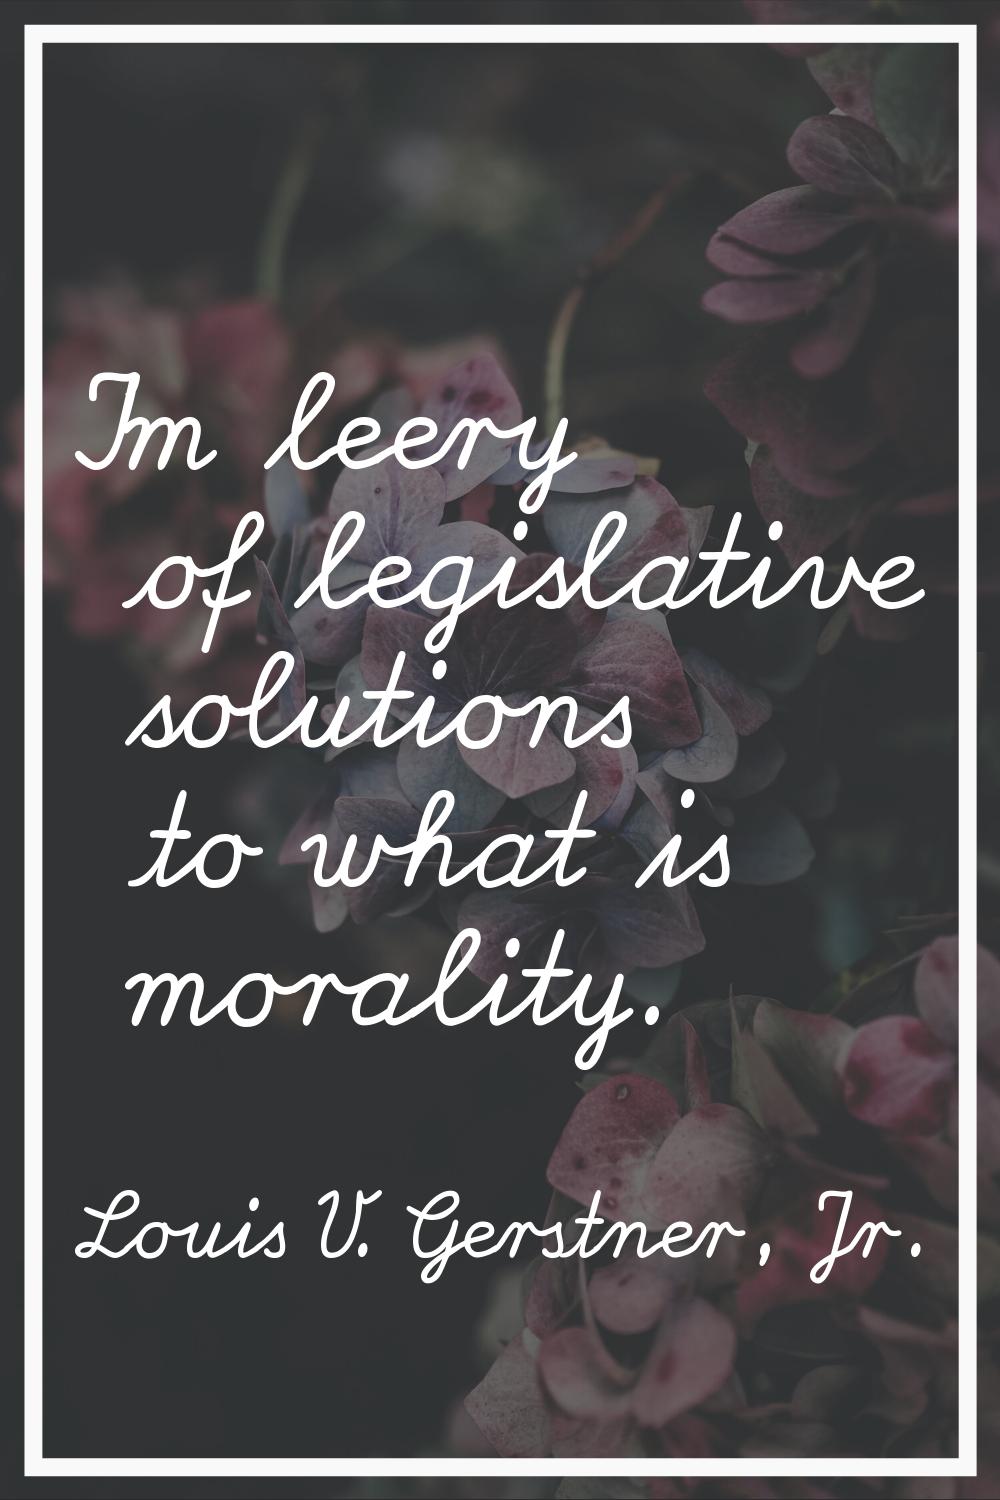 I'm leery of legislative solutions to what is morality.